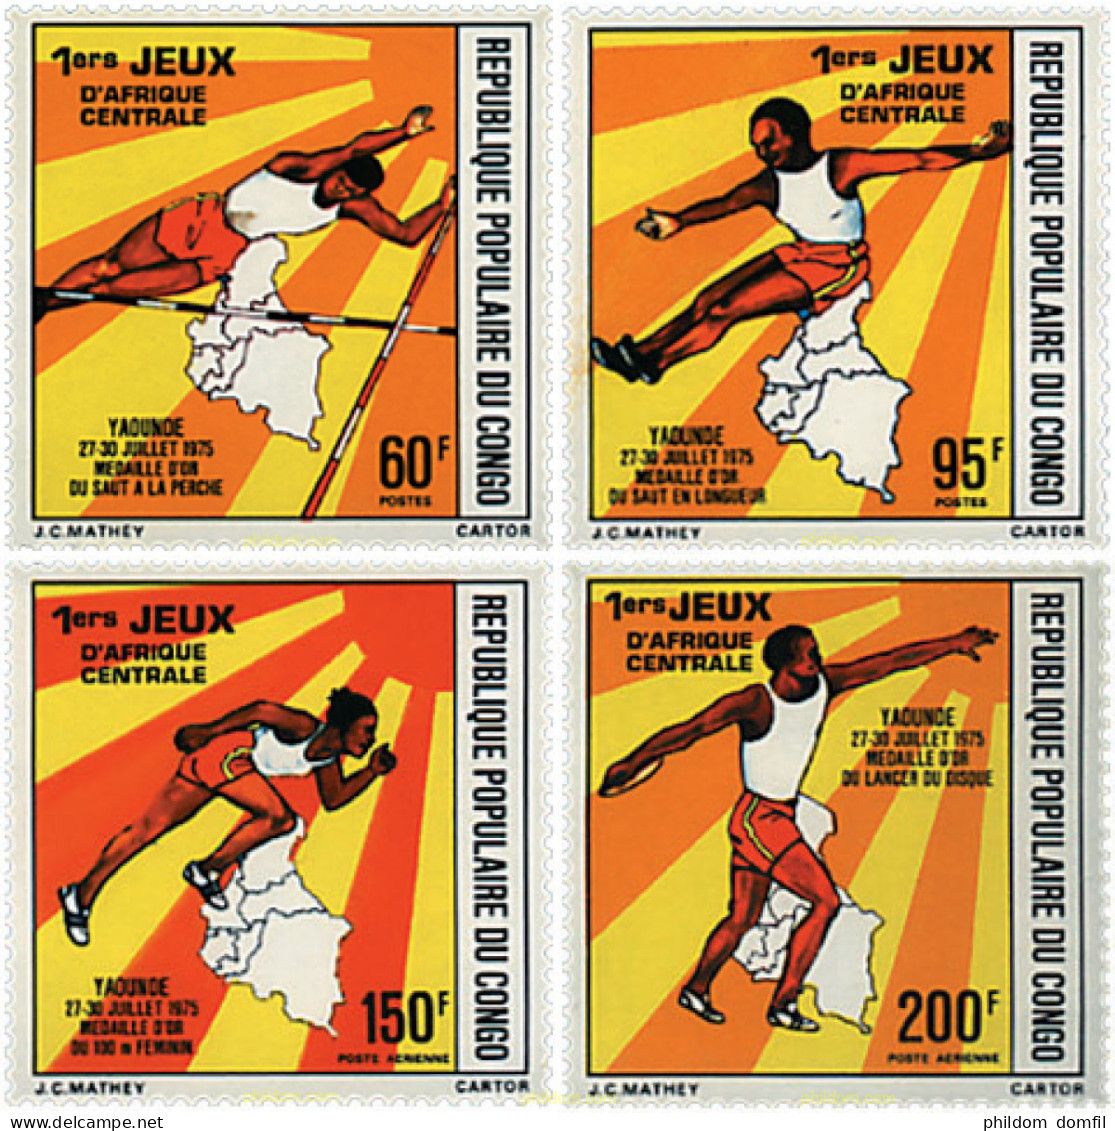 73379 MNH CONGO 1976 1 JUEGOS DEL AFRICA CENTRAL - Mint/hinged